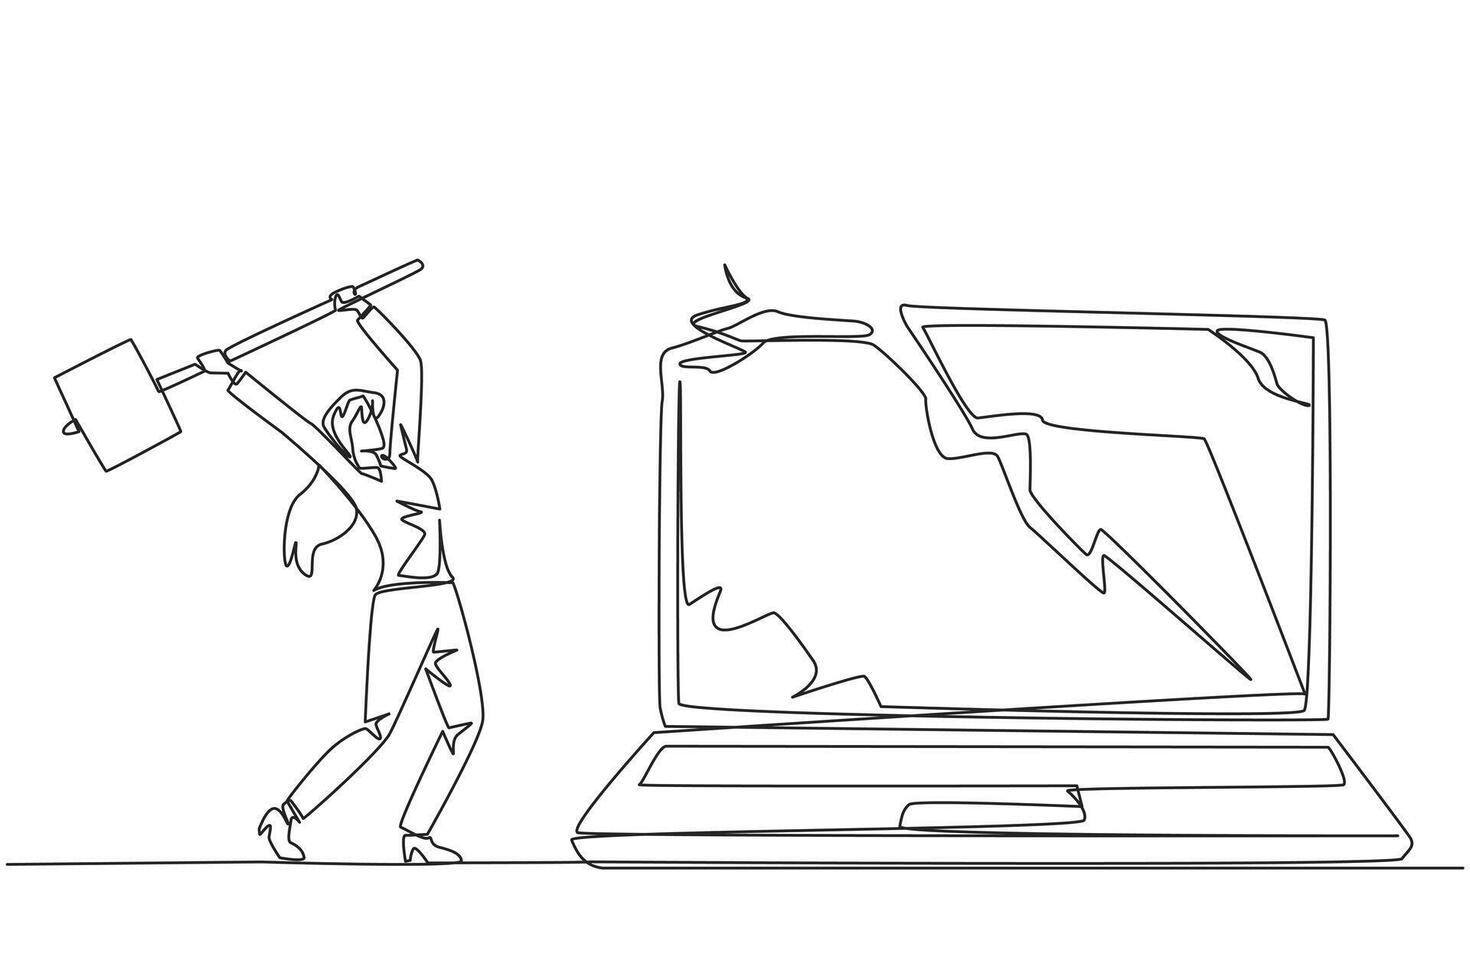 Single one line drawing businesswoman preparing to hit laptop. Rampage. Destroying technology that cannot be used optimally. Upgrade hardware and brainware. Continuous line design graphic illustration vector